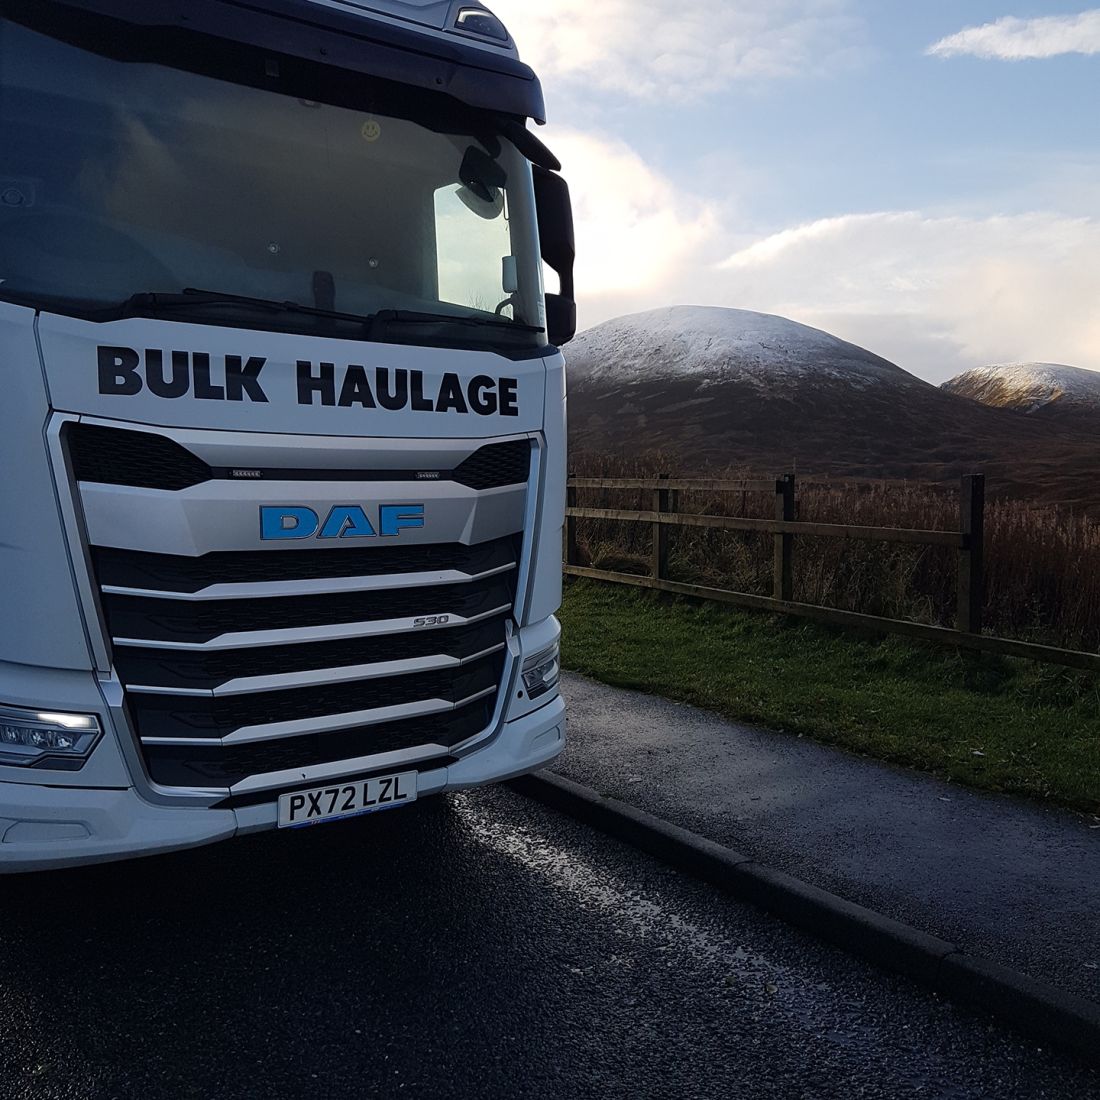 Close up of a Bulmans Bulk Haulage DAF truck cab, with snowy mountain peaks of the Lake District in the background.